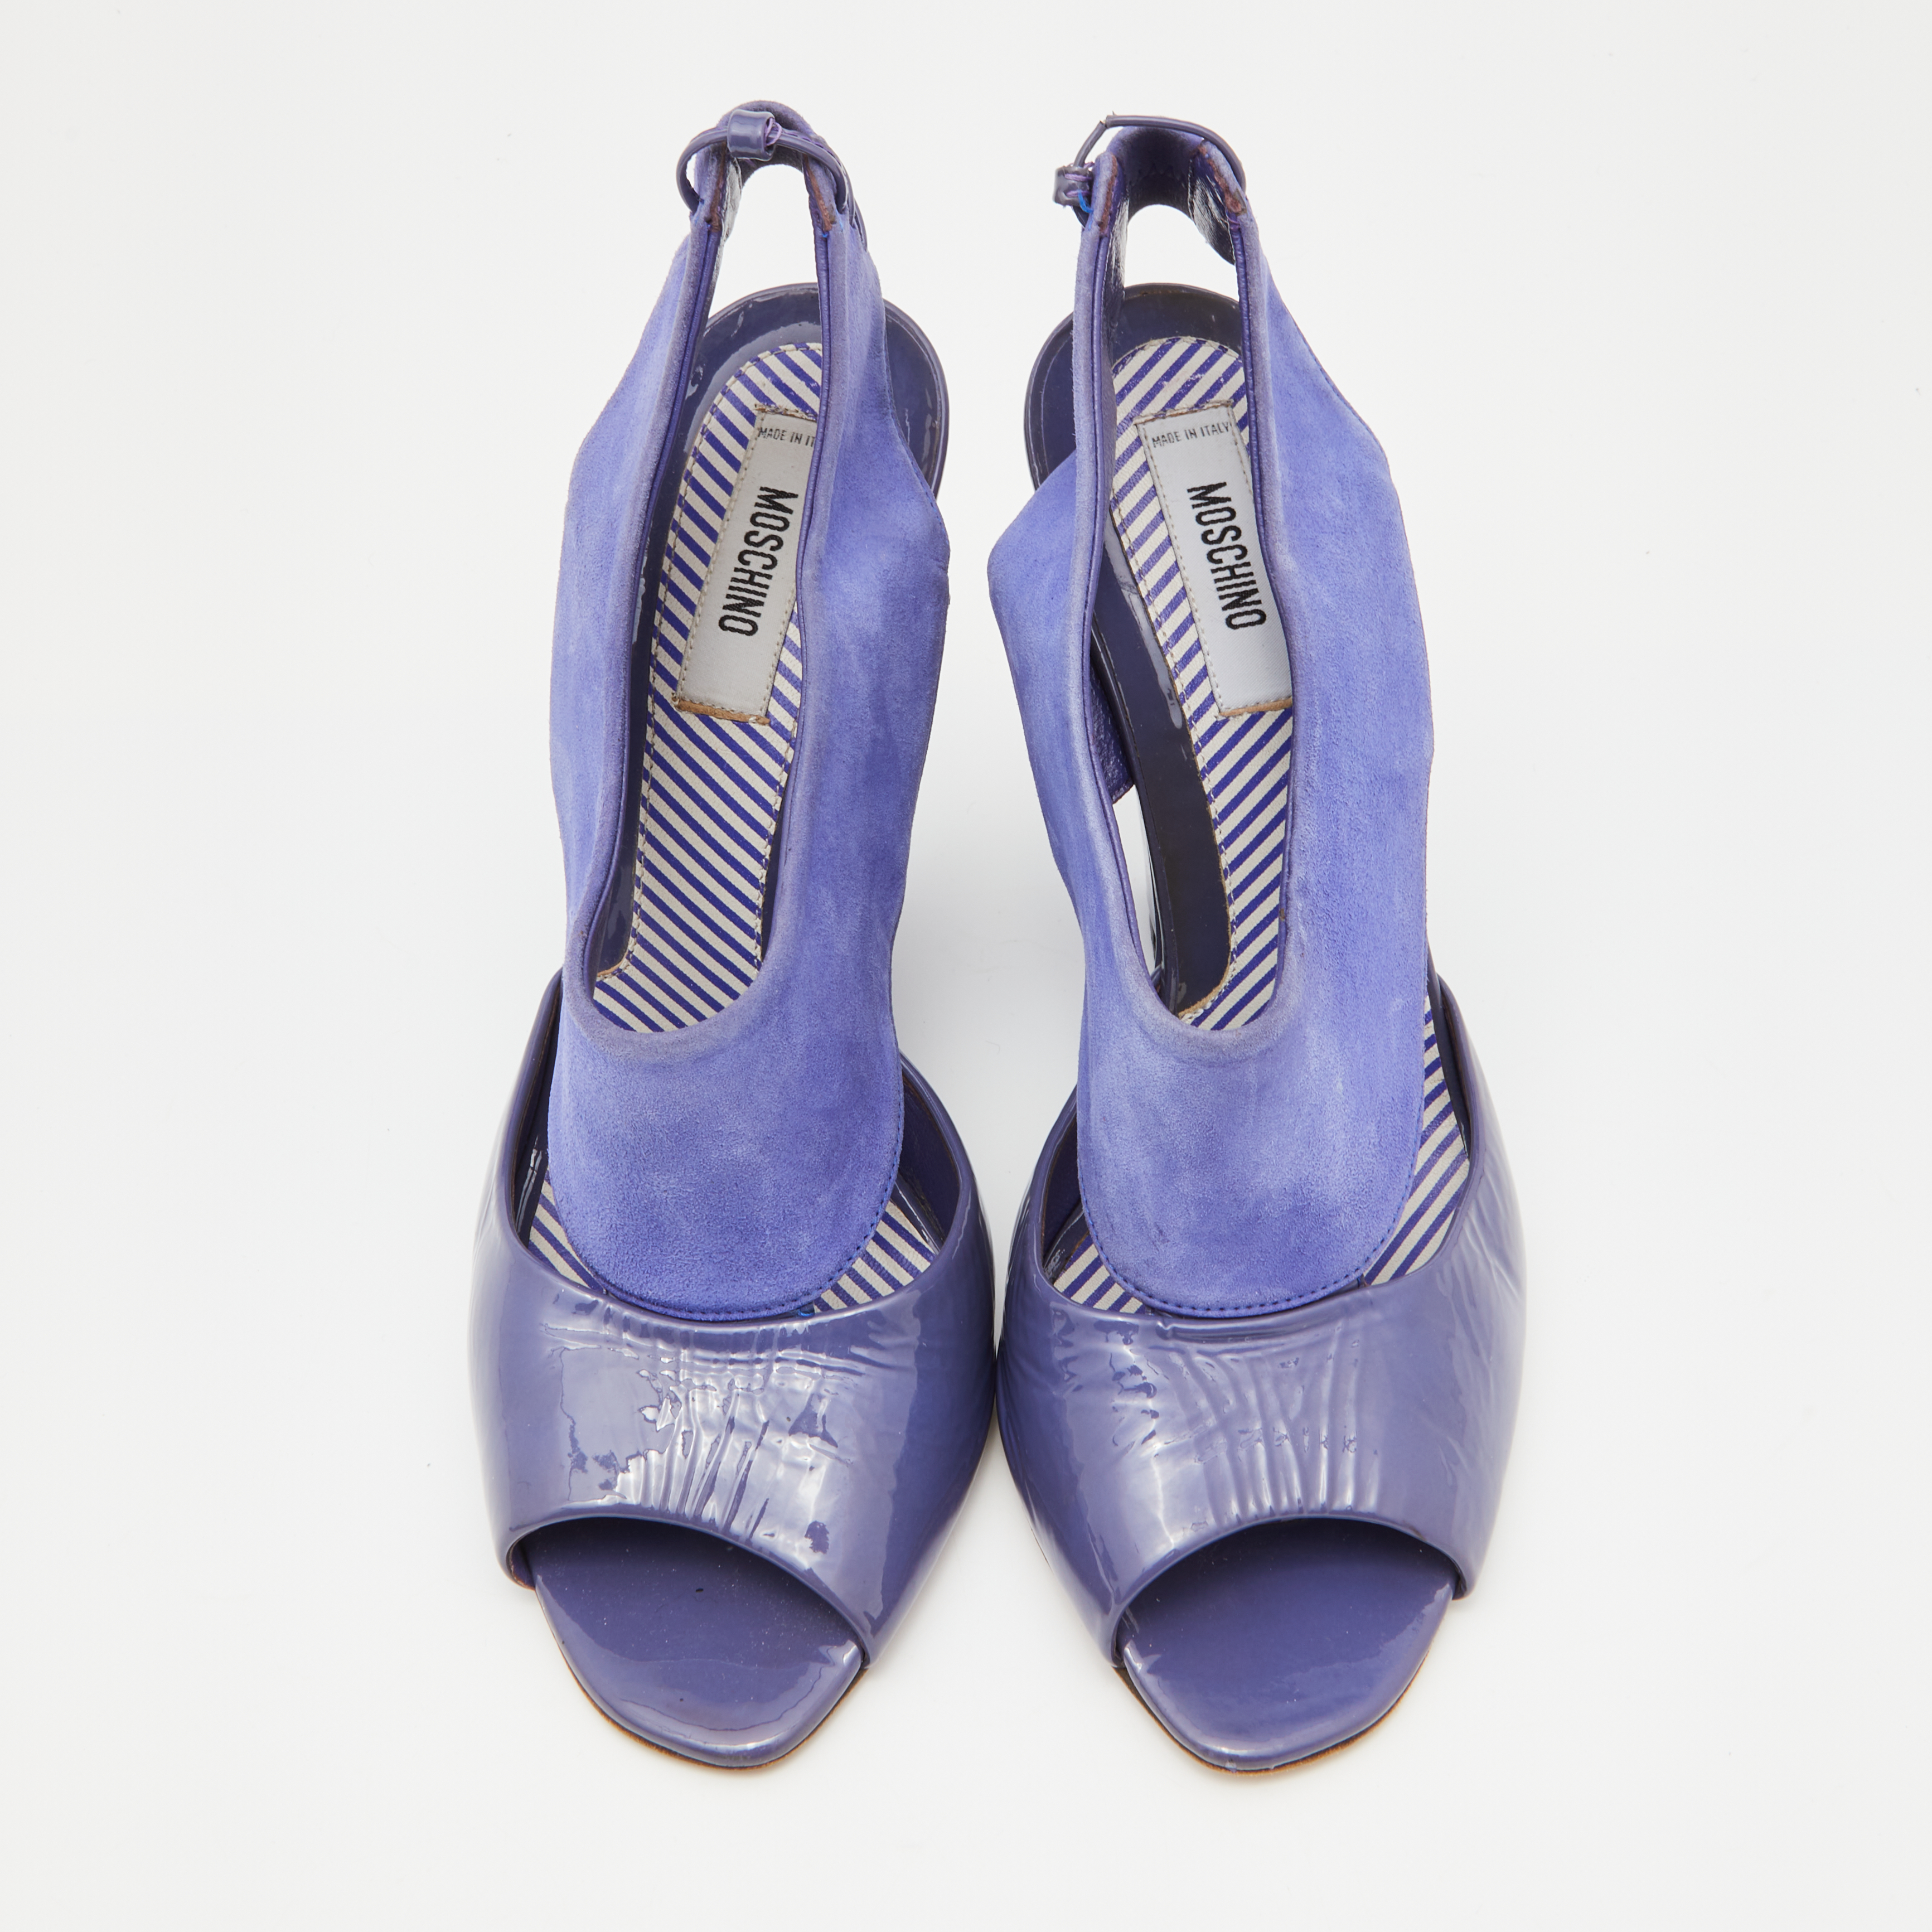 Moschino Blue Suede And Patent Leather Wedge Sandals Size 39